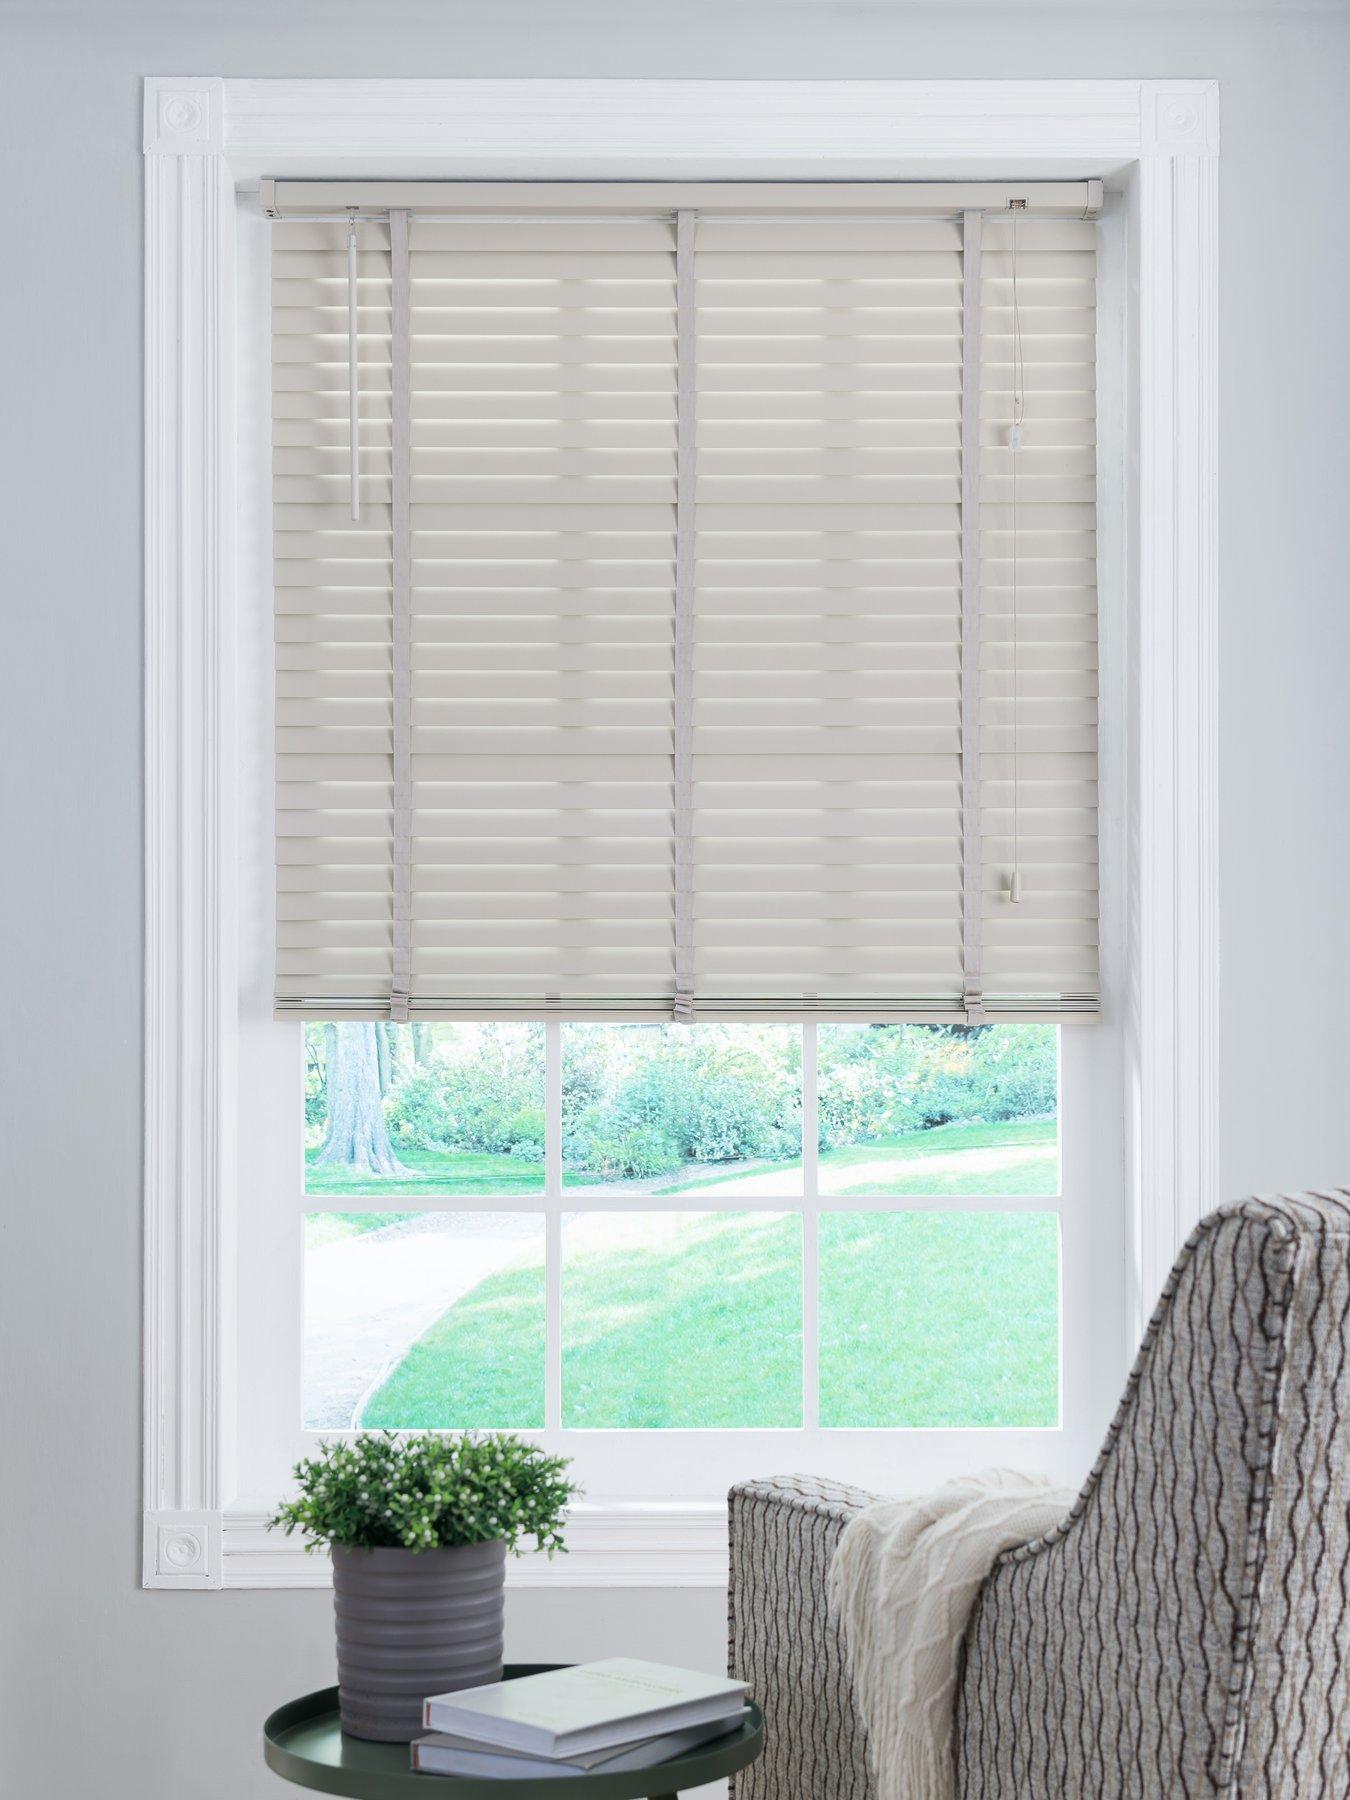 Details about   Steel Grey & White Embossed Pattern PVC Window Blind Venetian Blinds Trim-able 